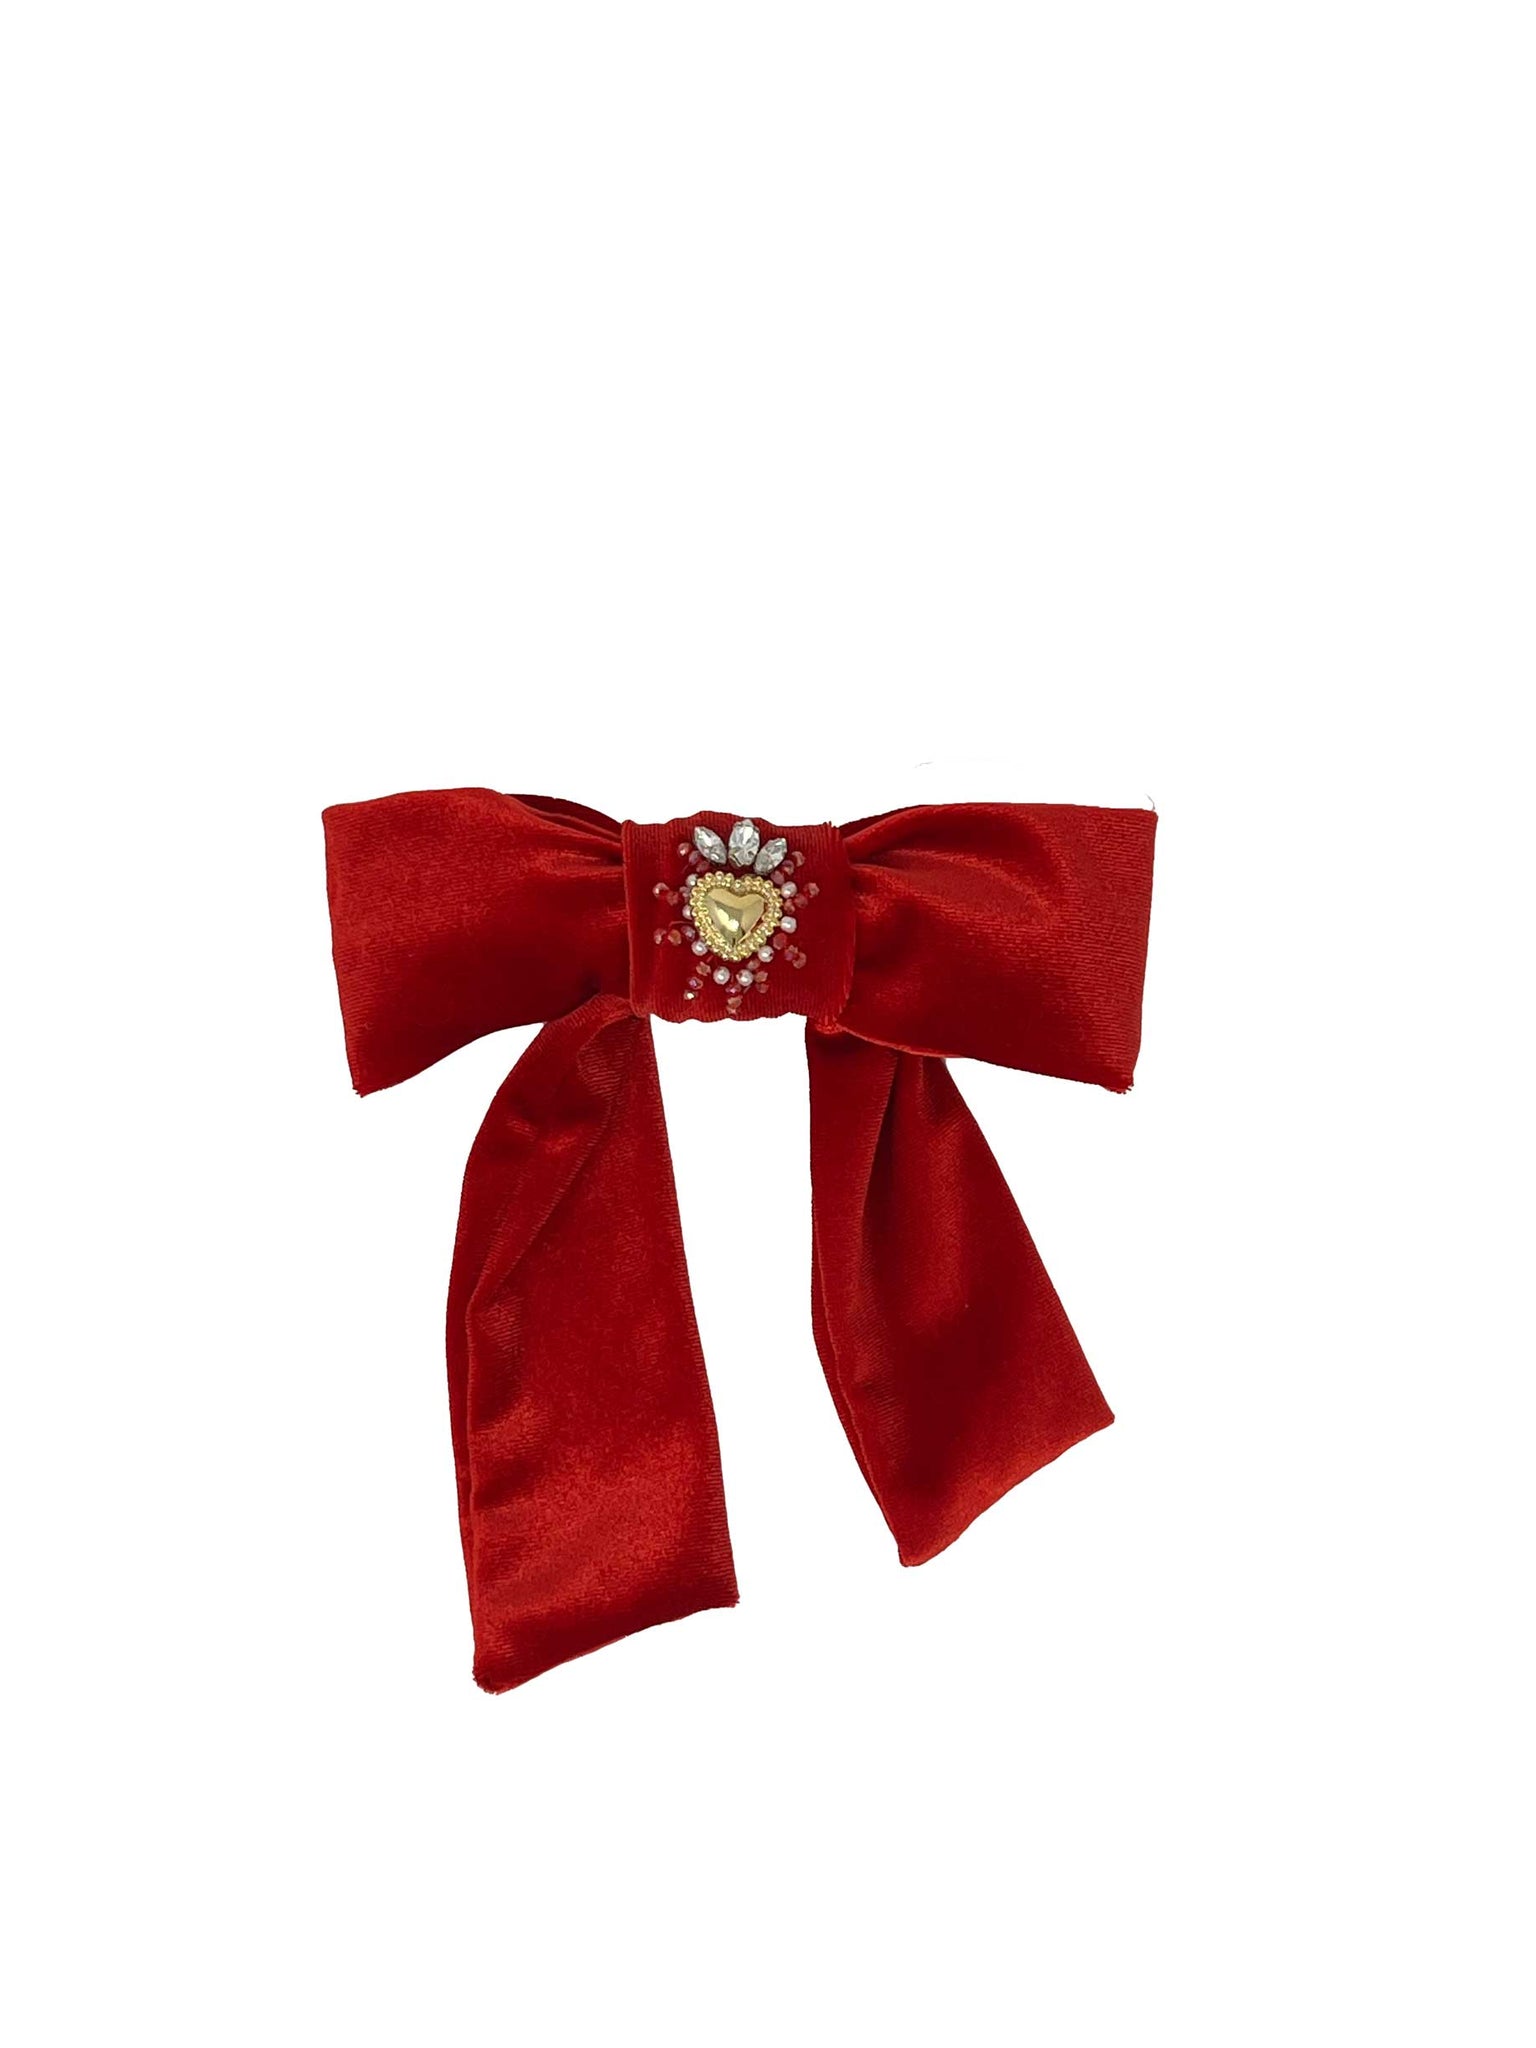 Red velvet bow barrette with crystals